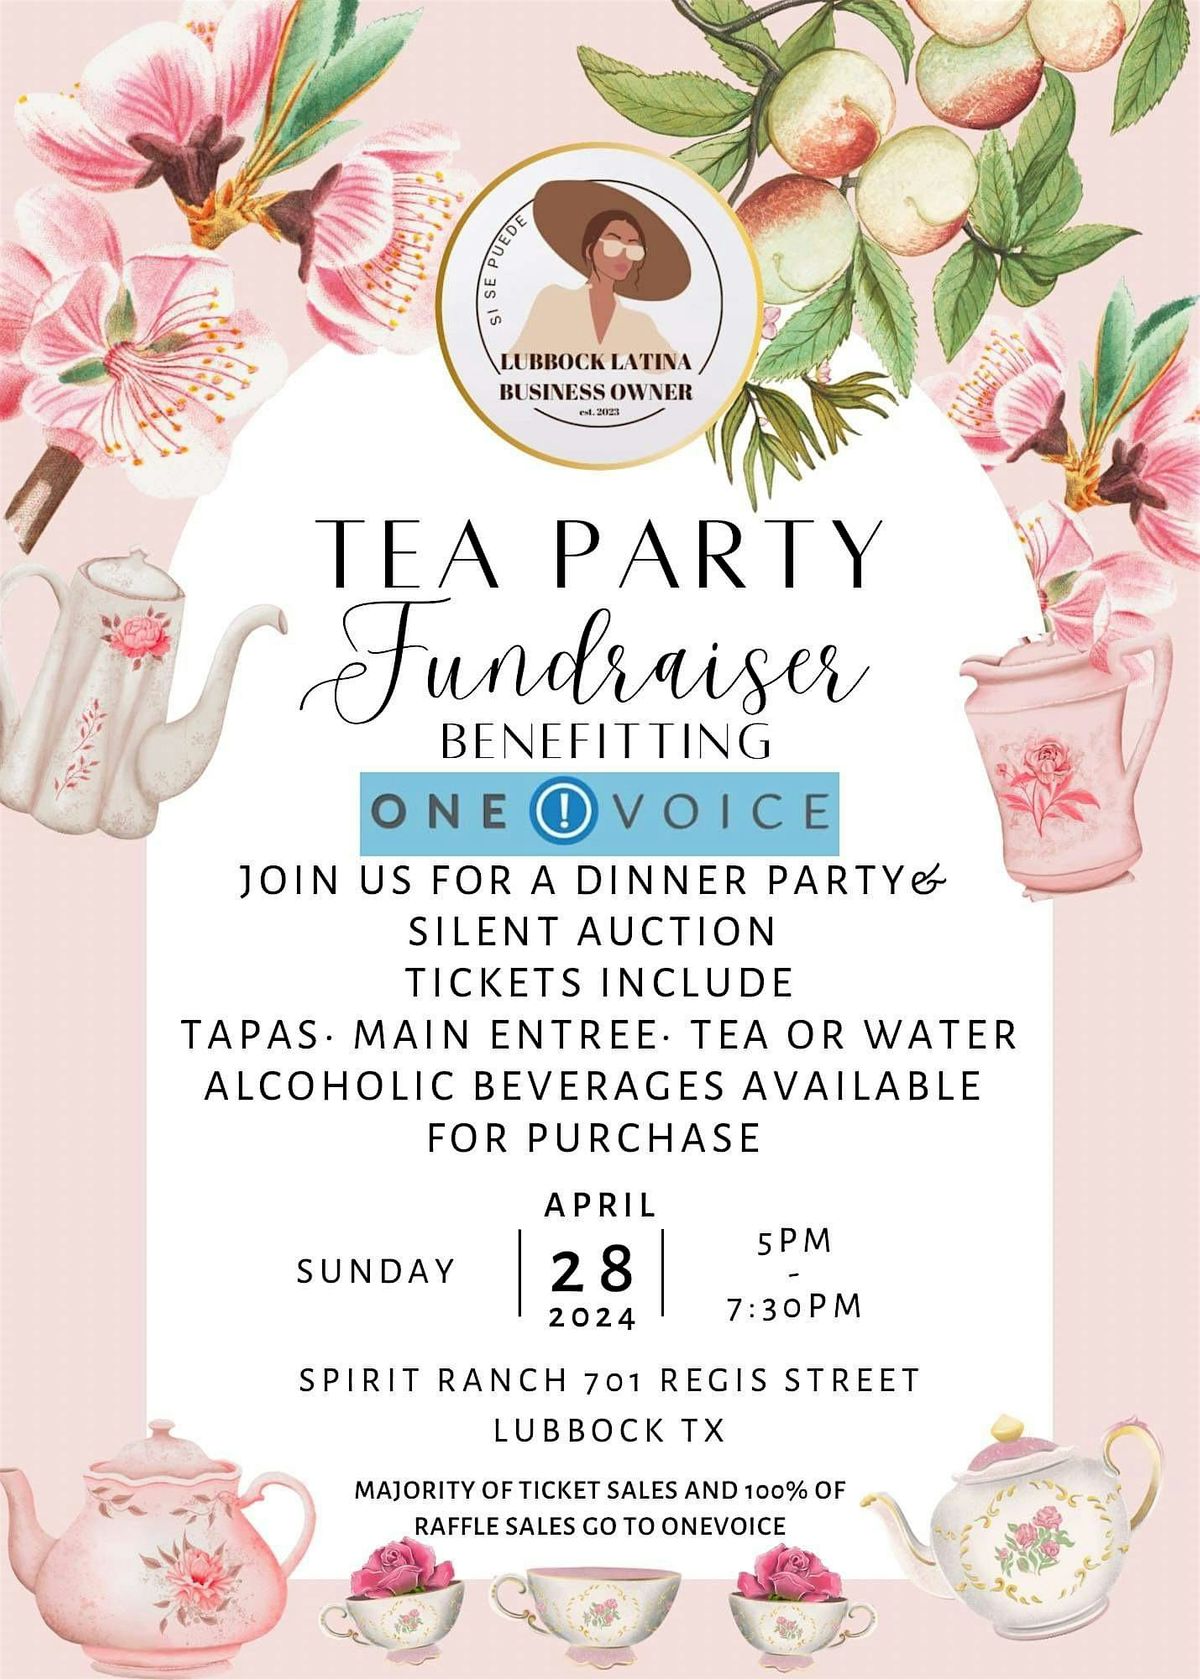 Tea Party Fundraiser Event for One Voice Organization